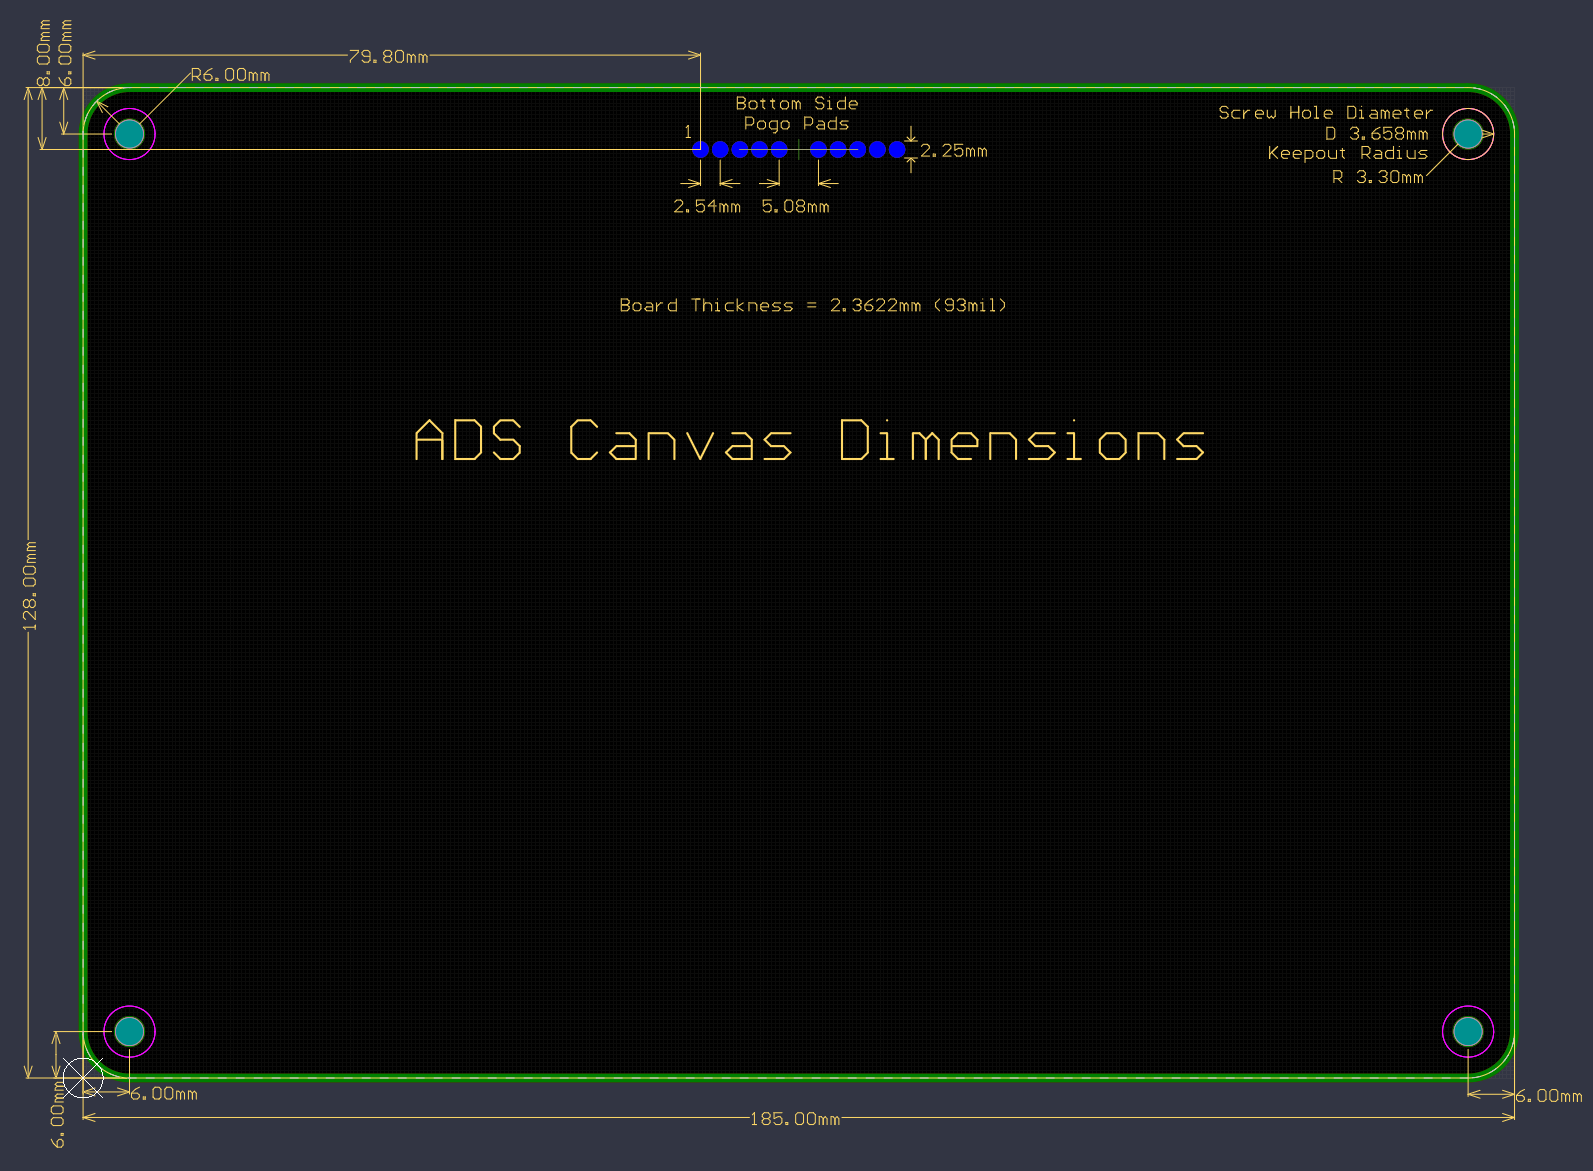 ads_canvas_dimensions.png